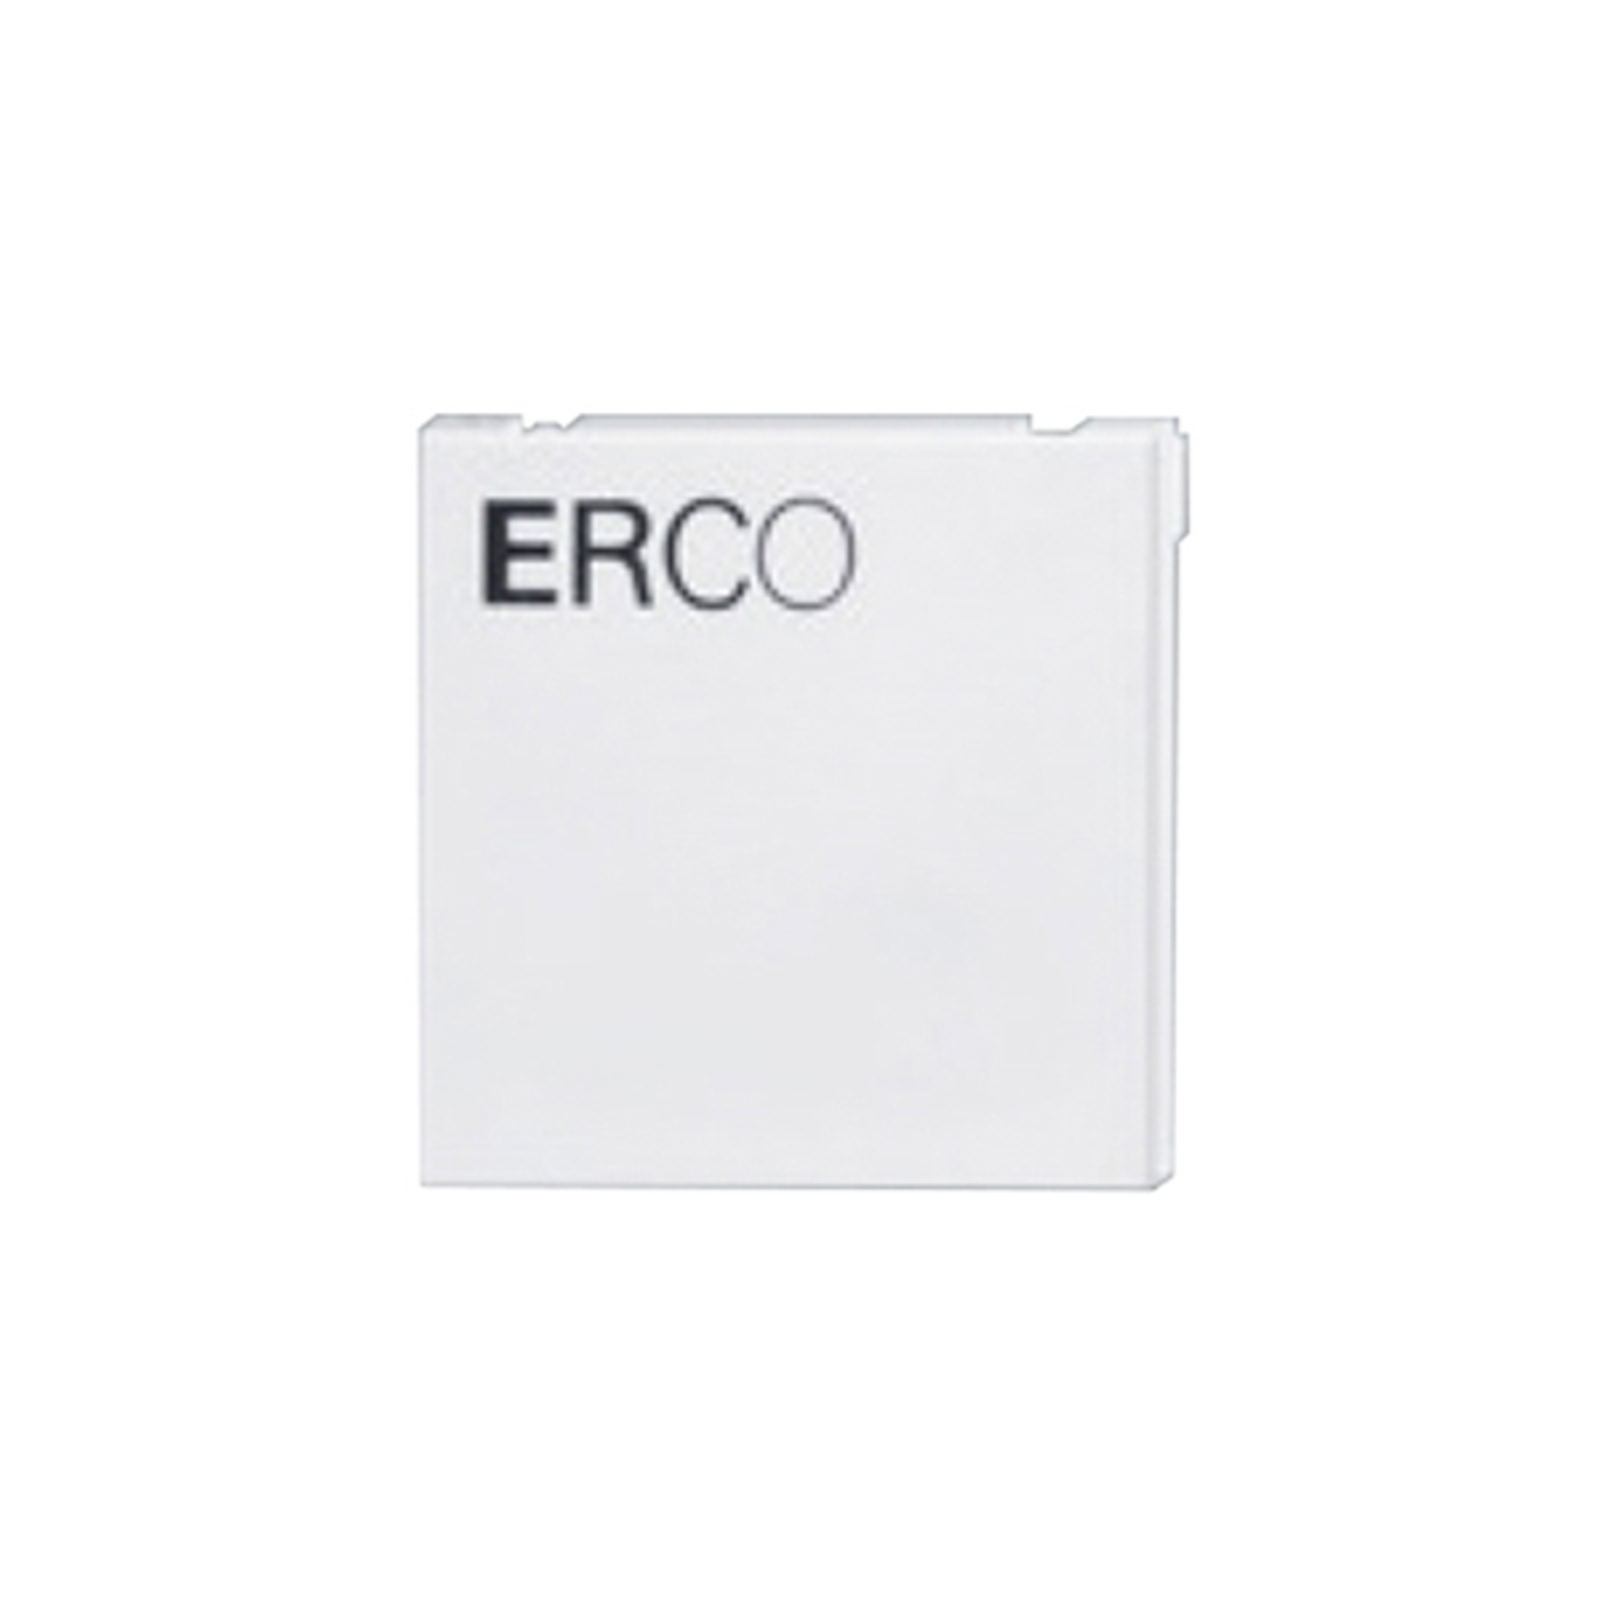 ERCO end plate for three-circuit track, white